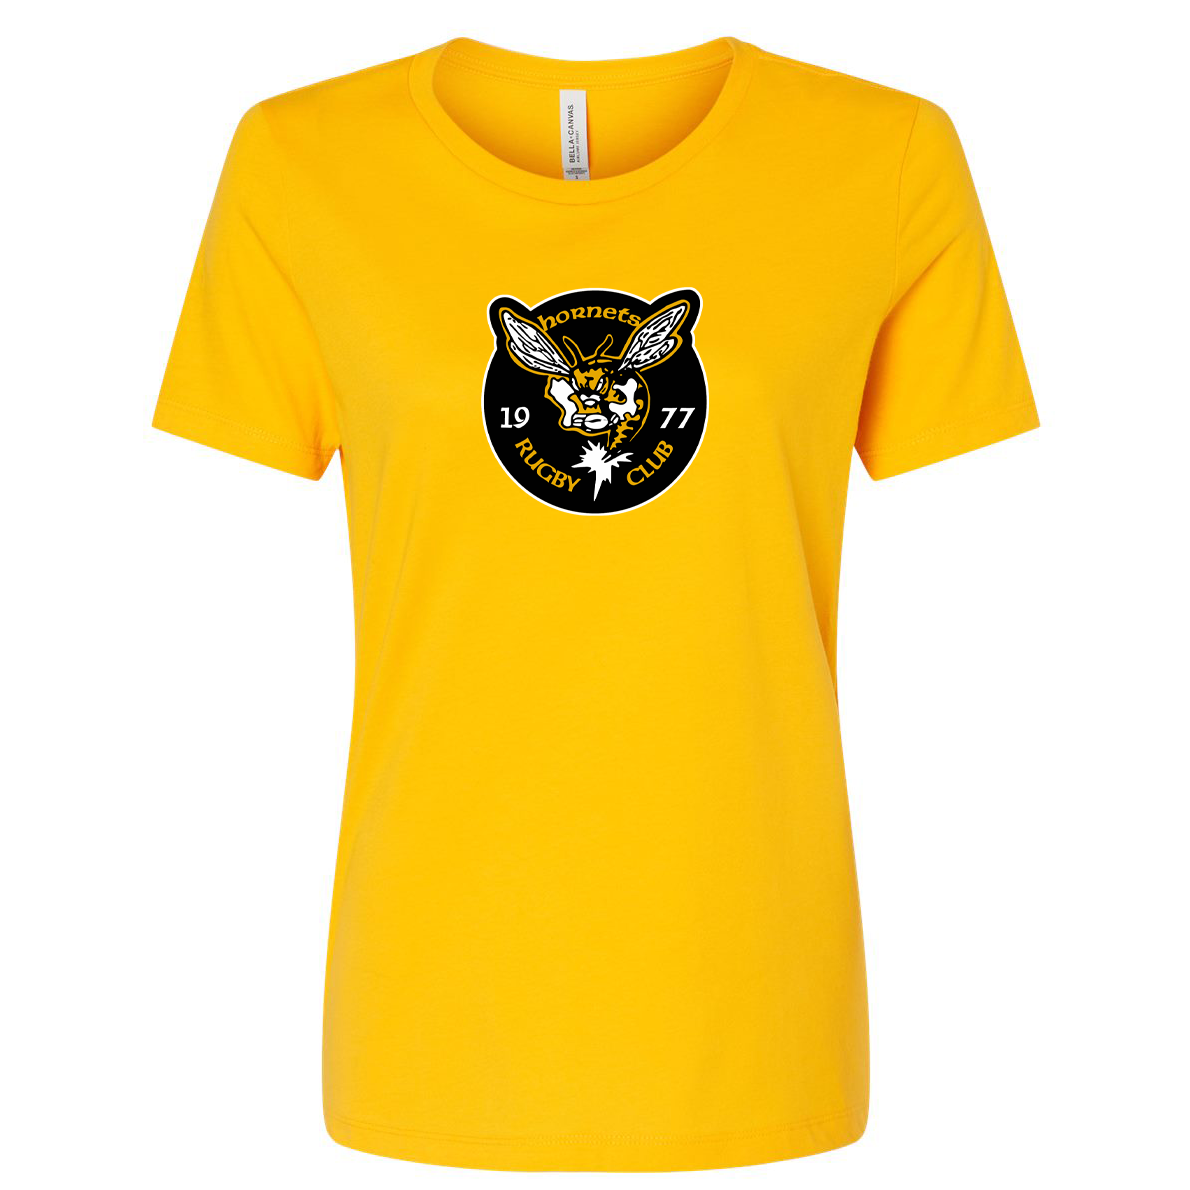 St. Louis Hornets Rugby Club Women's Relaxed Fit Tee